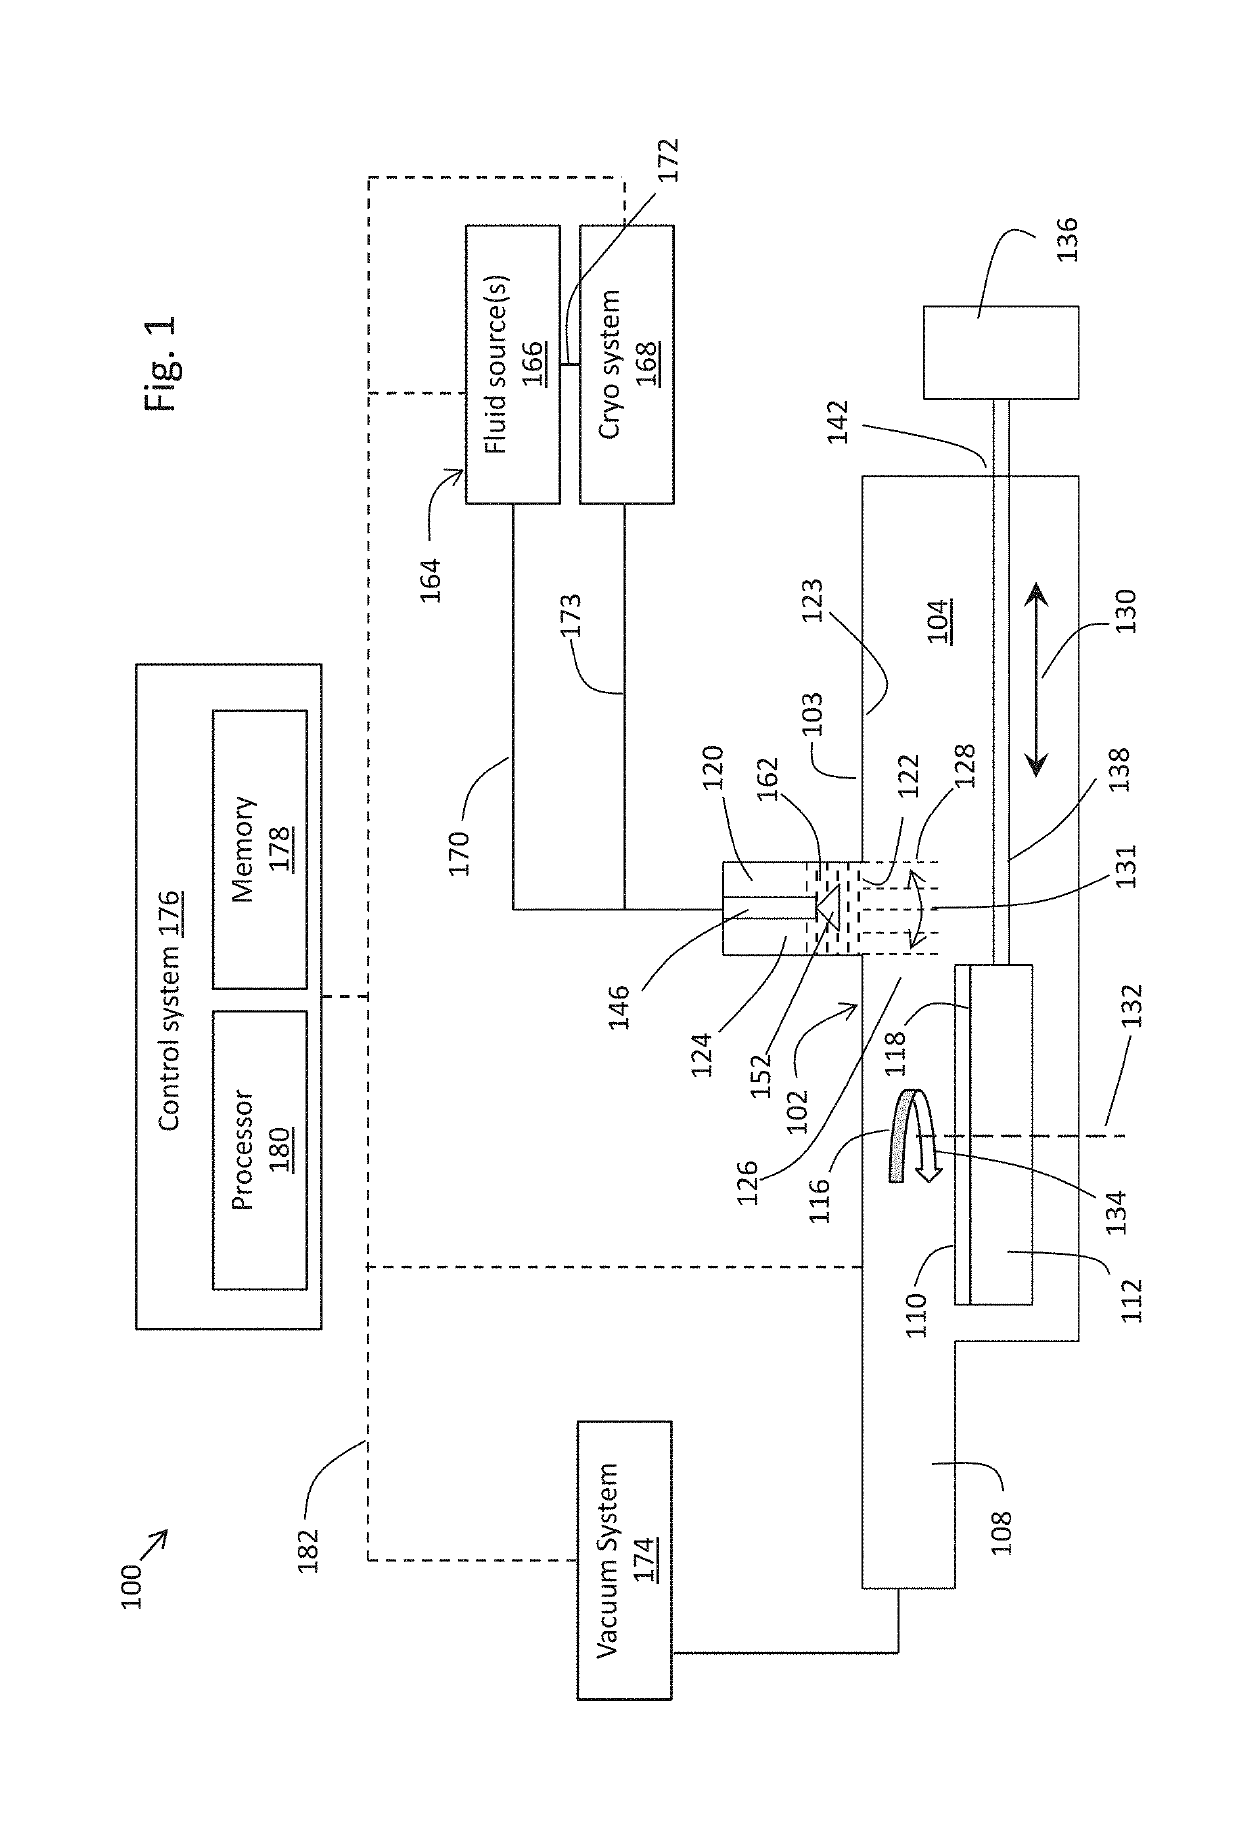 Microelectronic treatment system having treatment spray with controllable beam size